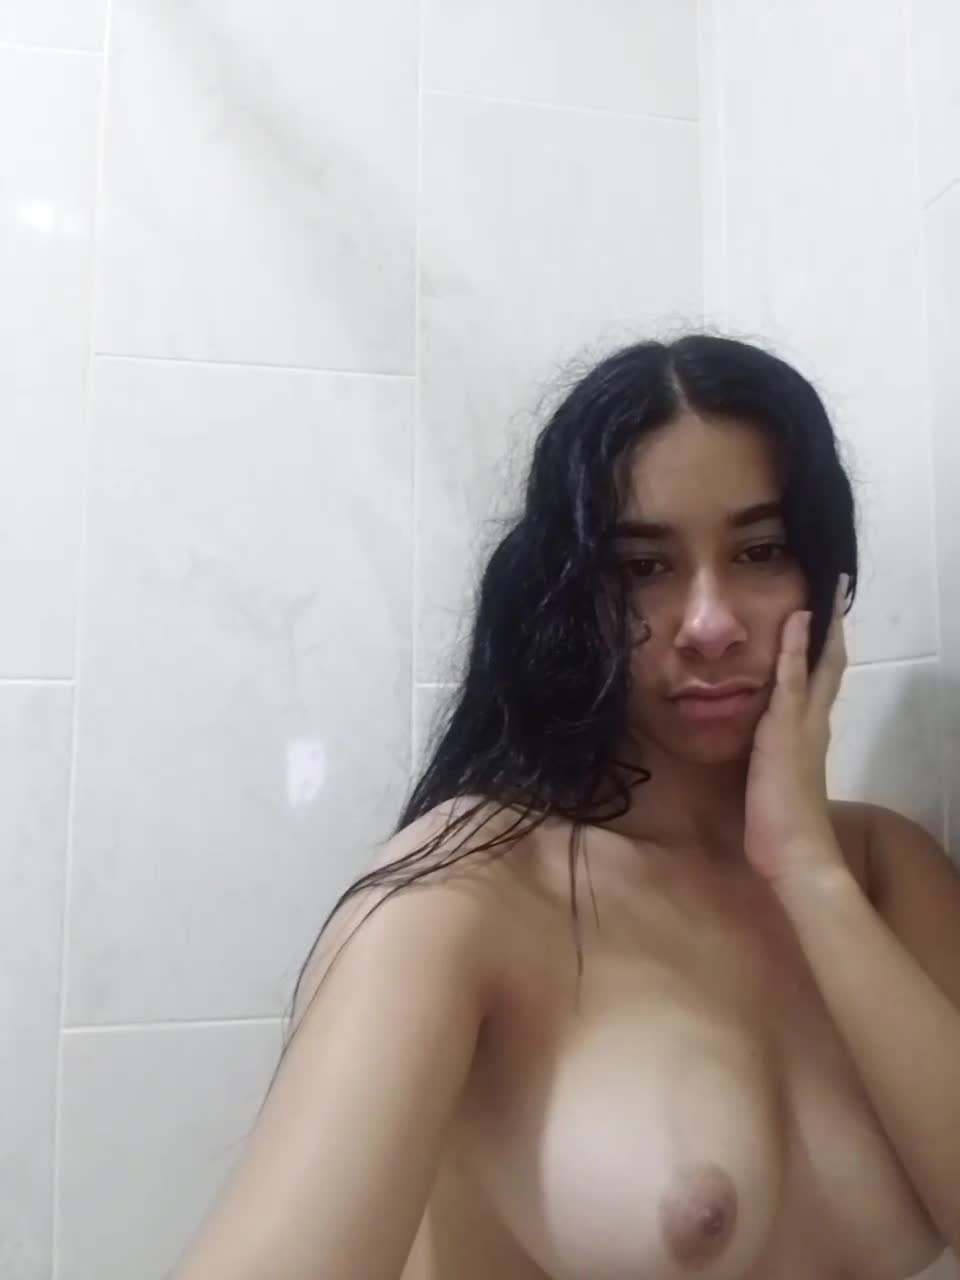 View or download file hunterycharlotte69 on 2023-07-04 from bongacams